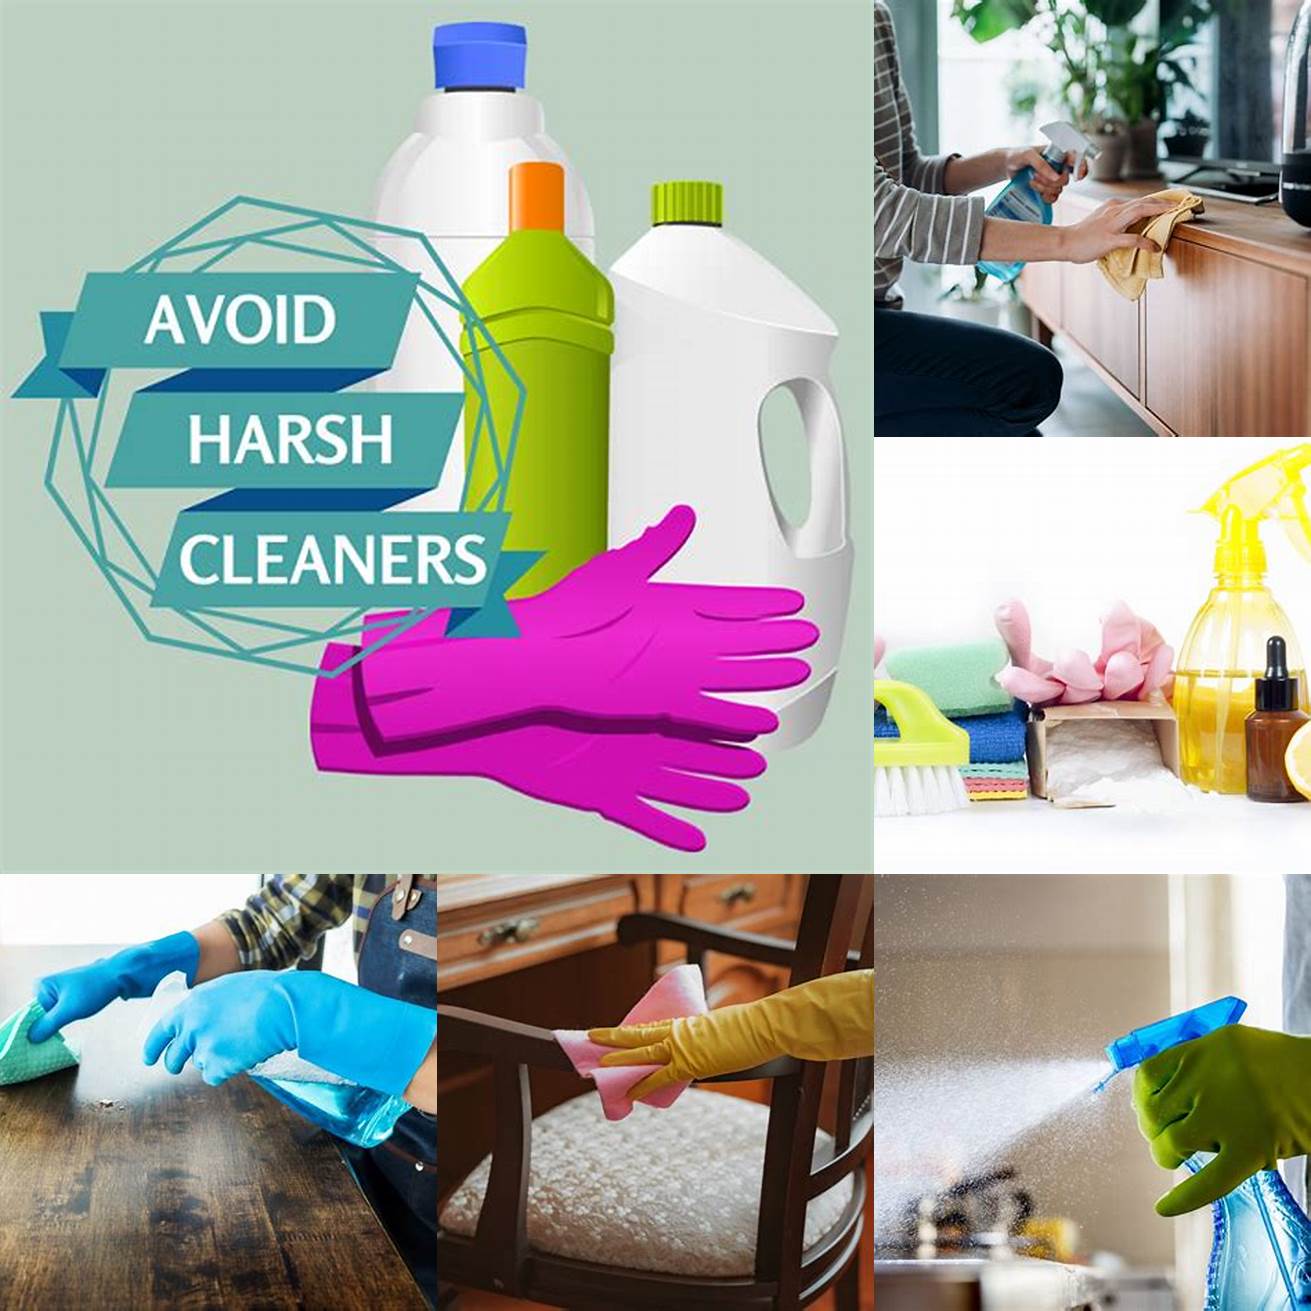 Avoid harsh cleaning products